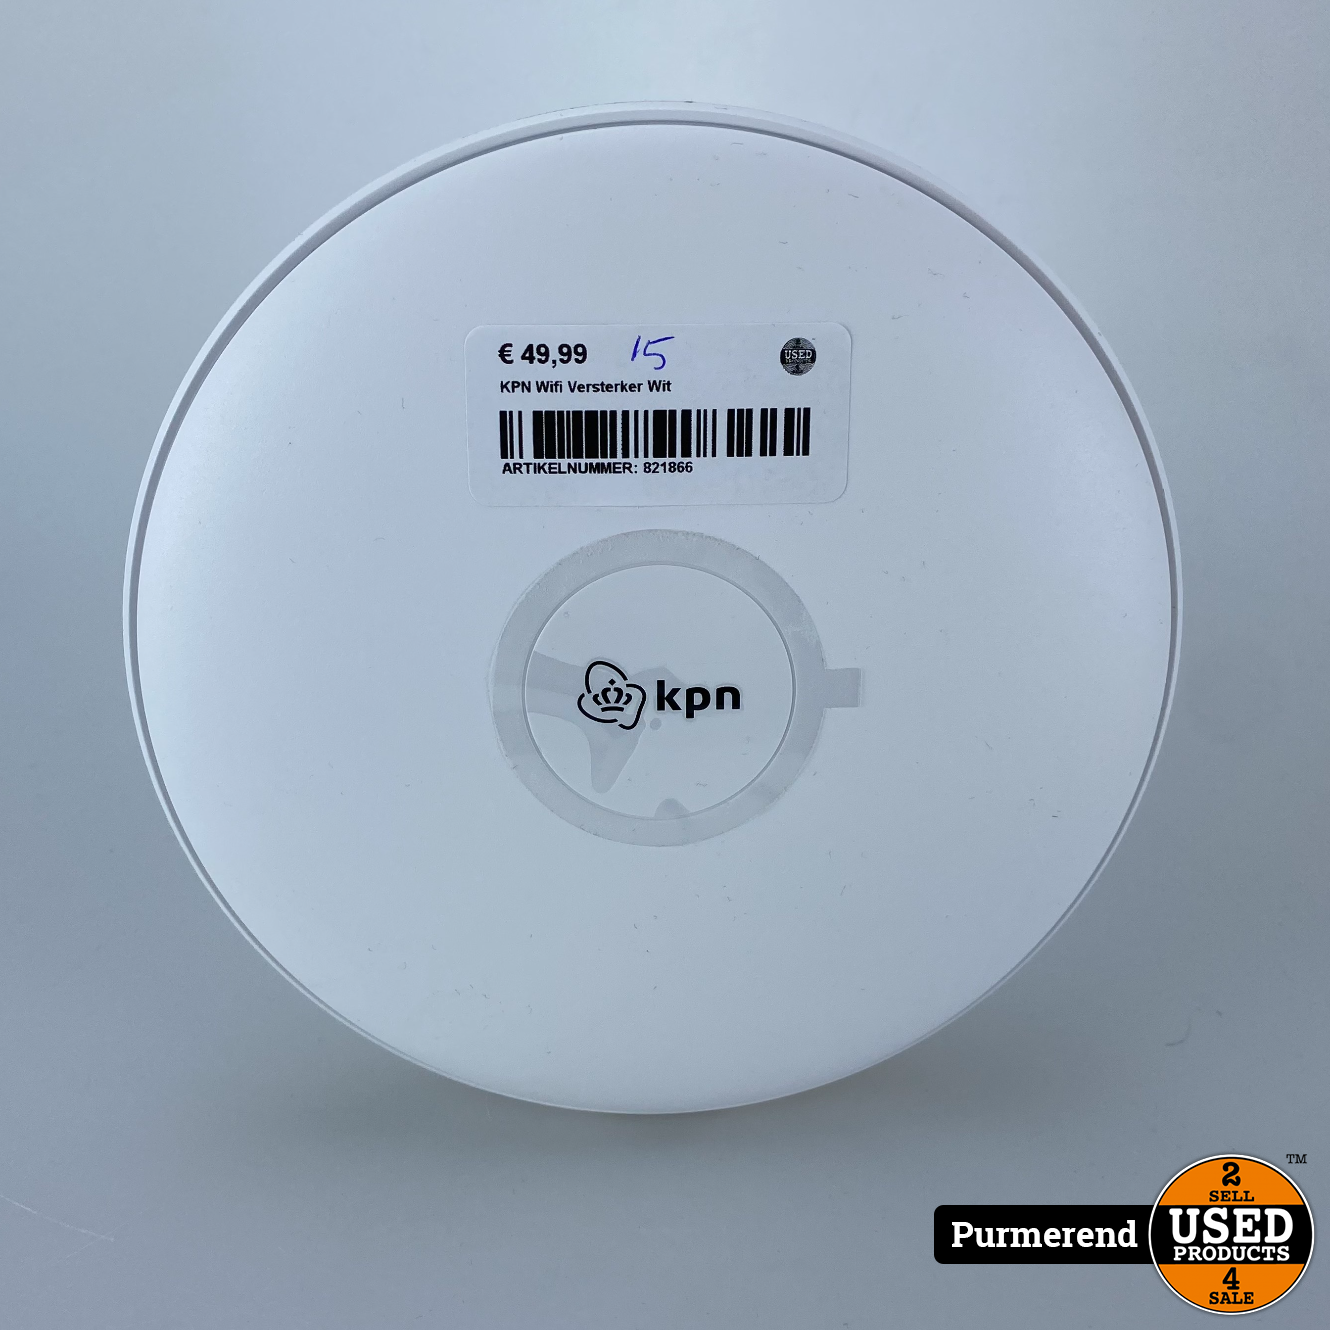 Verrast Remmen Product KPN Wifi Versterker Wit - Used Products Purmerend